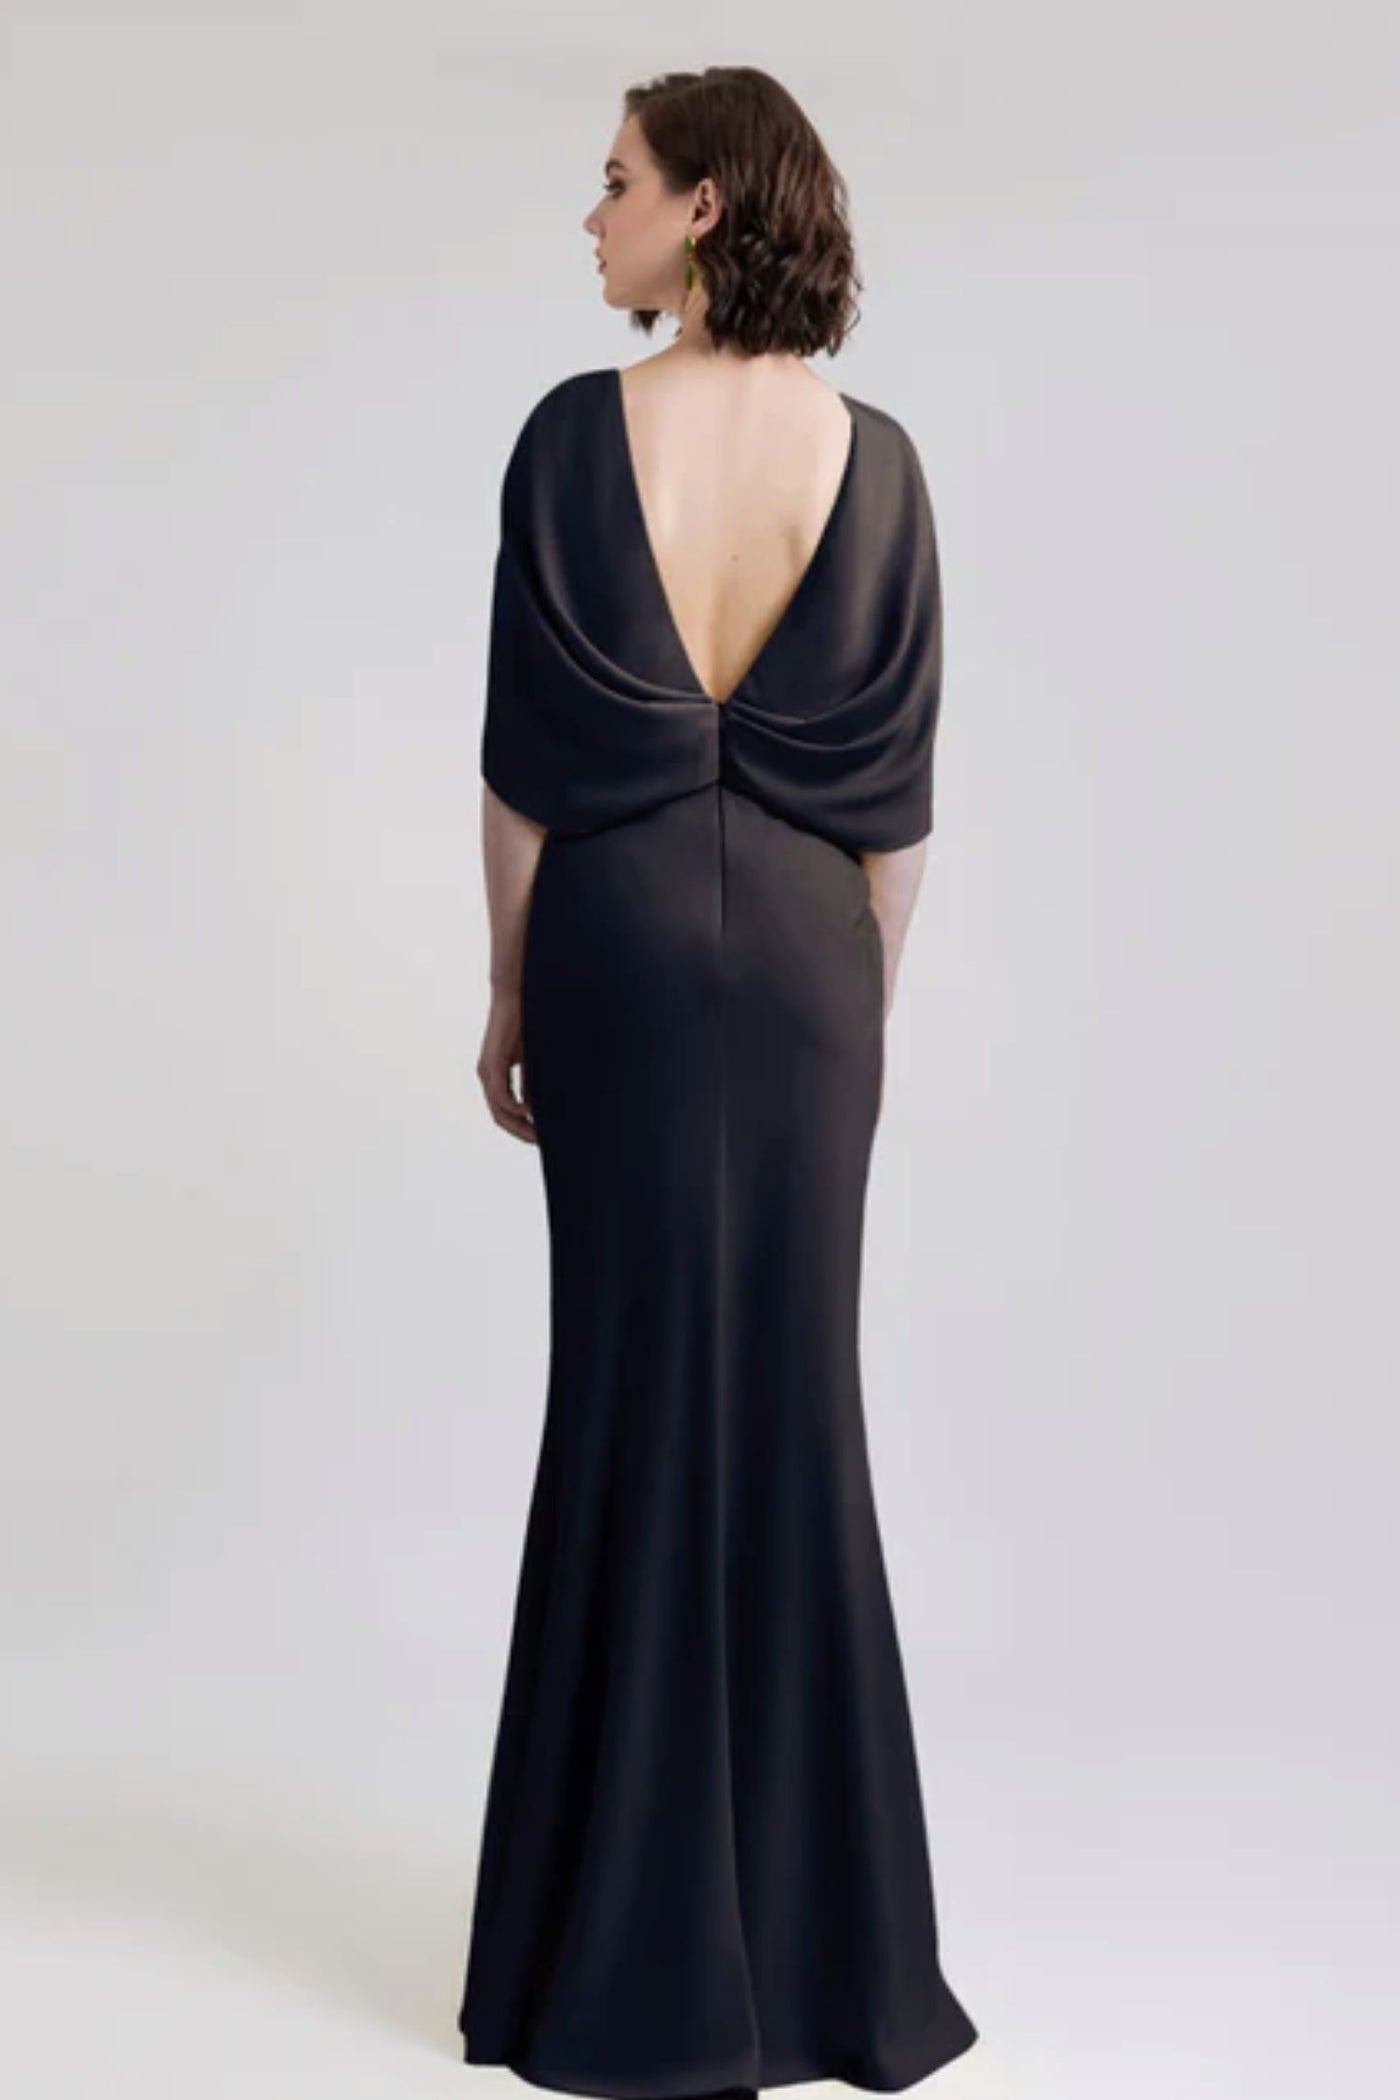 Leone Cape Gown by Gemy Maalouf - RENTAL